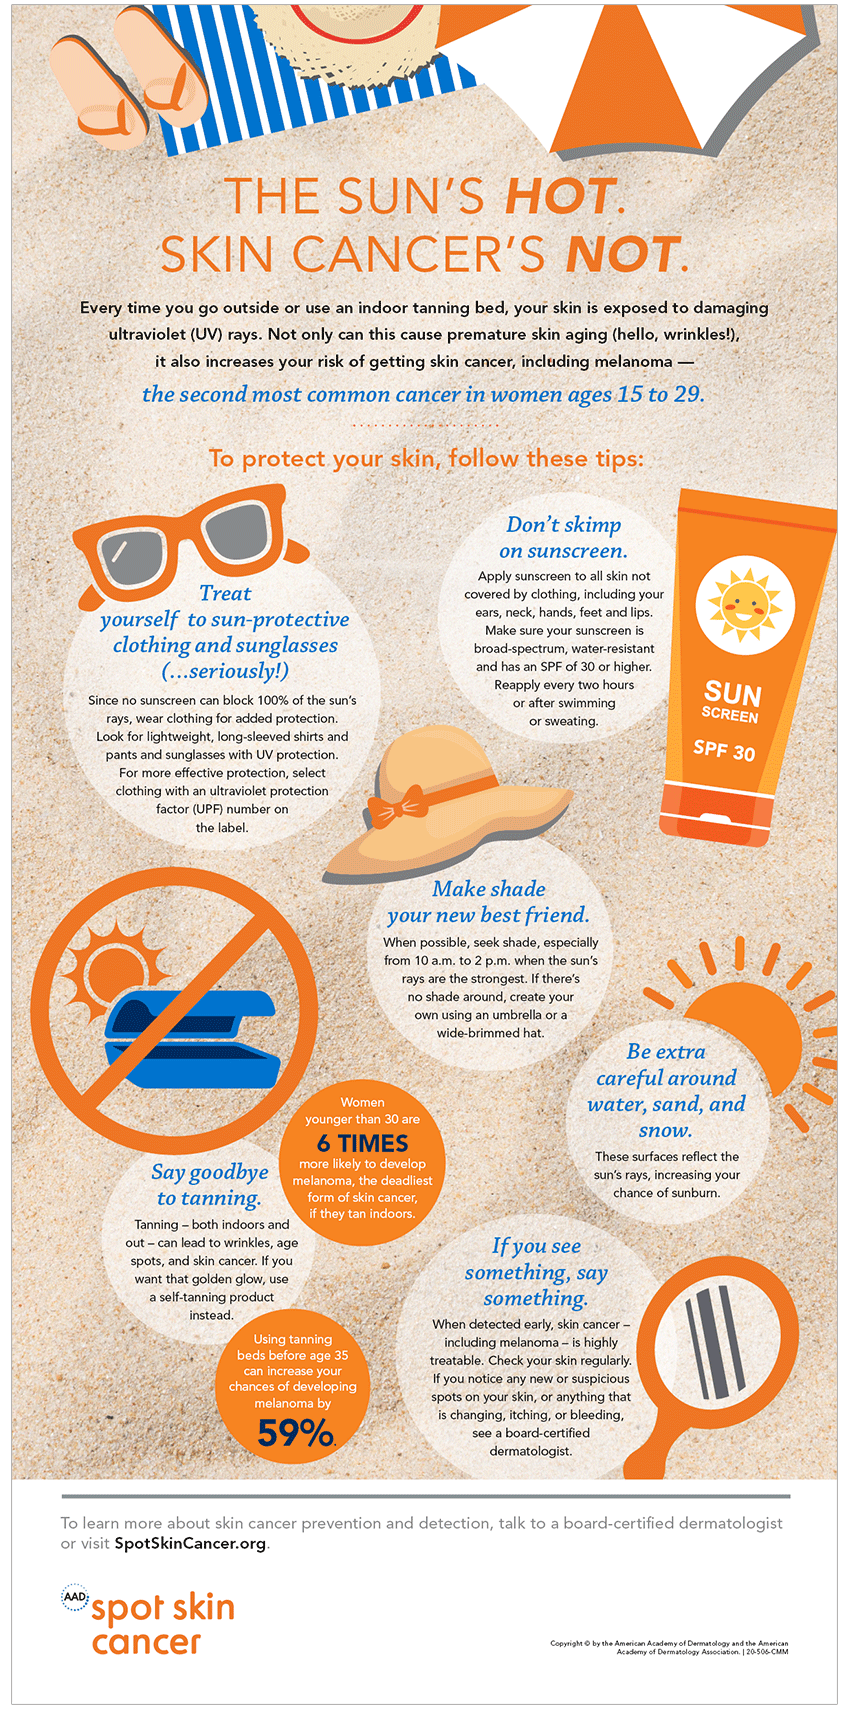 July is UV Safety Awareness Month